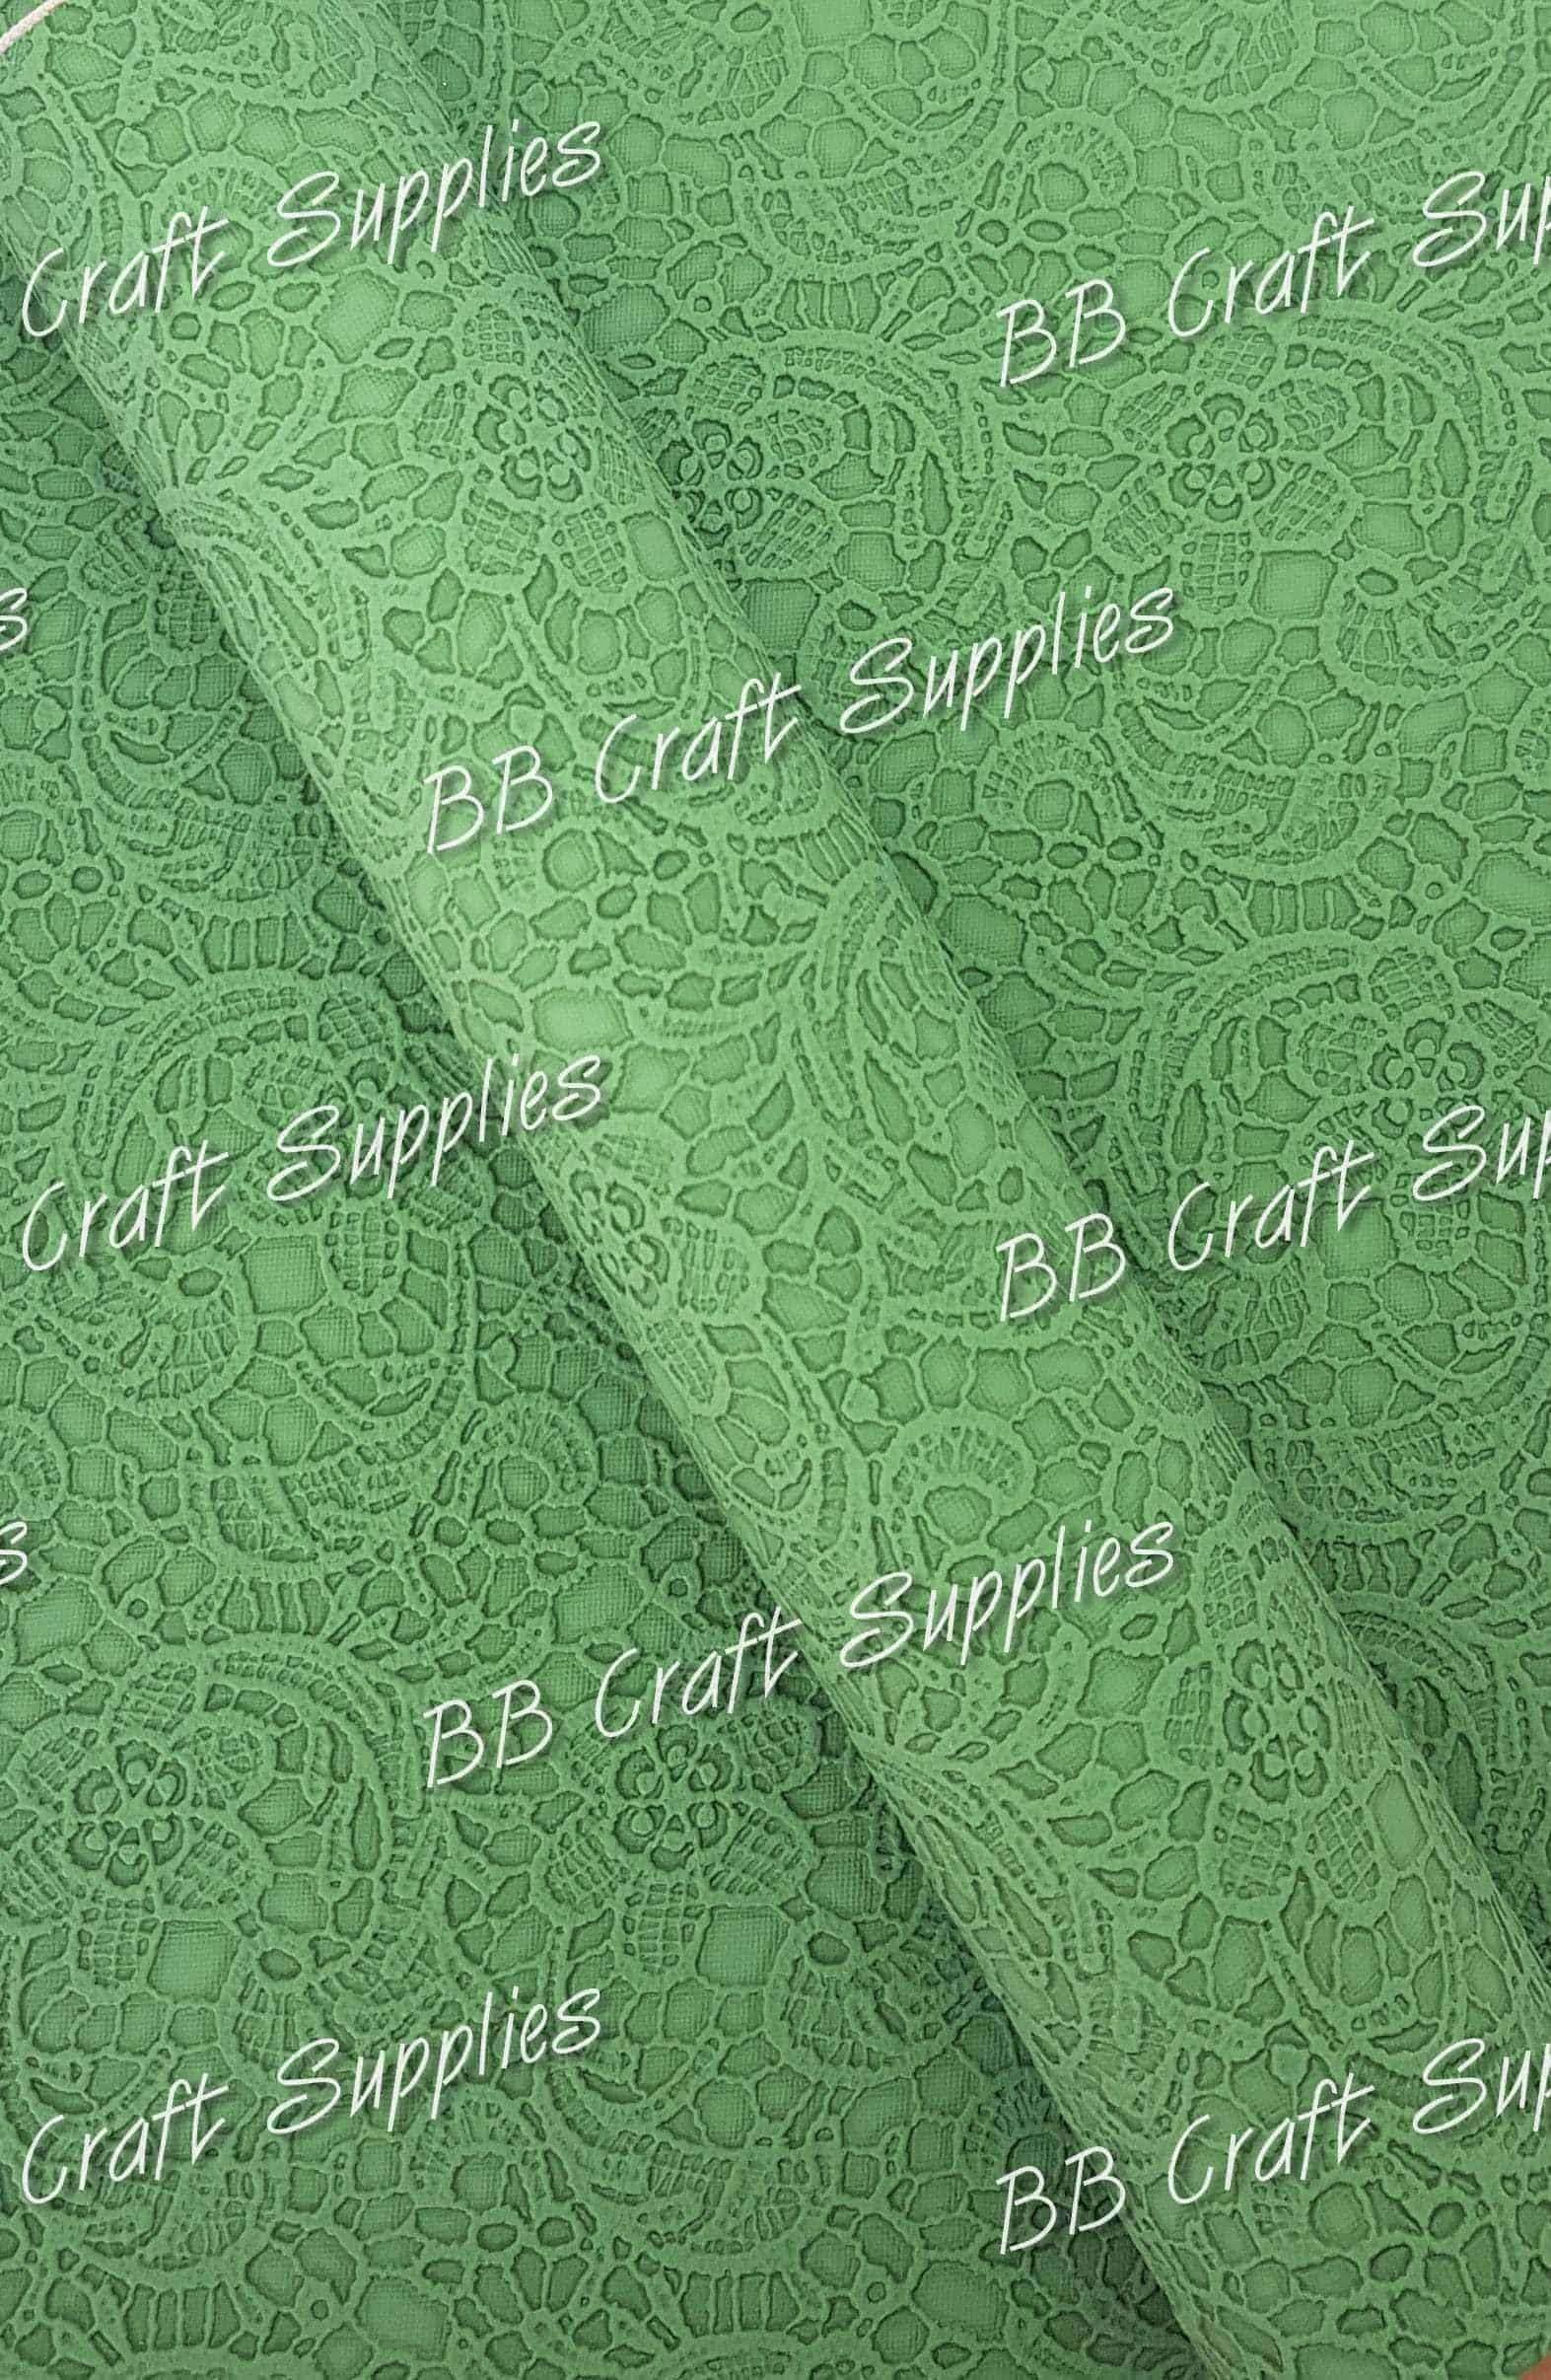 Roll - Butter Soft Embossed Lace Green - butter, embossed, Faux, Faux Leather, Roll, soft - Bare Butler Faux Leather Supplies 